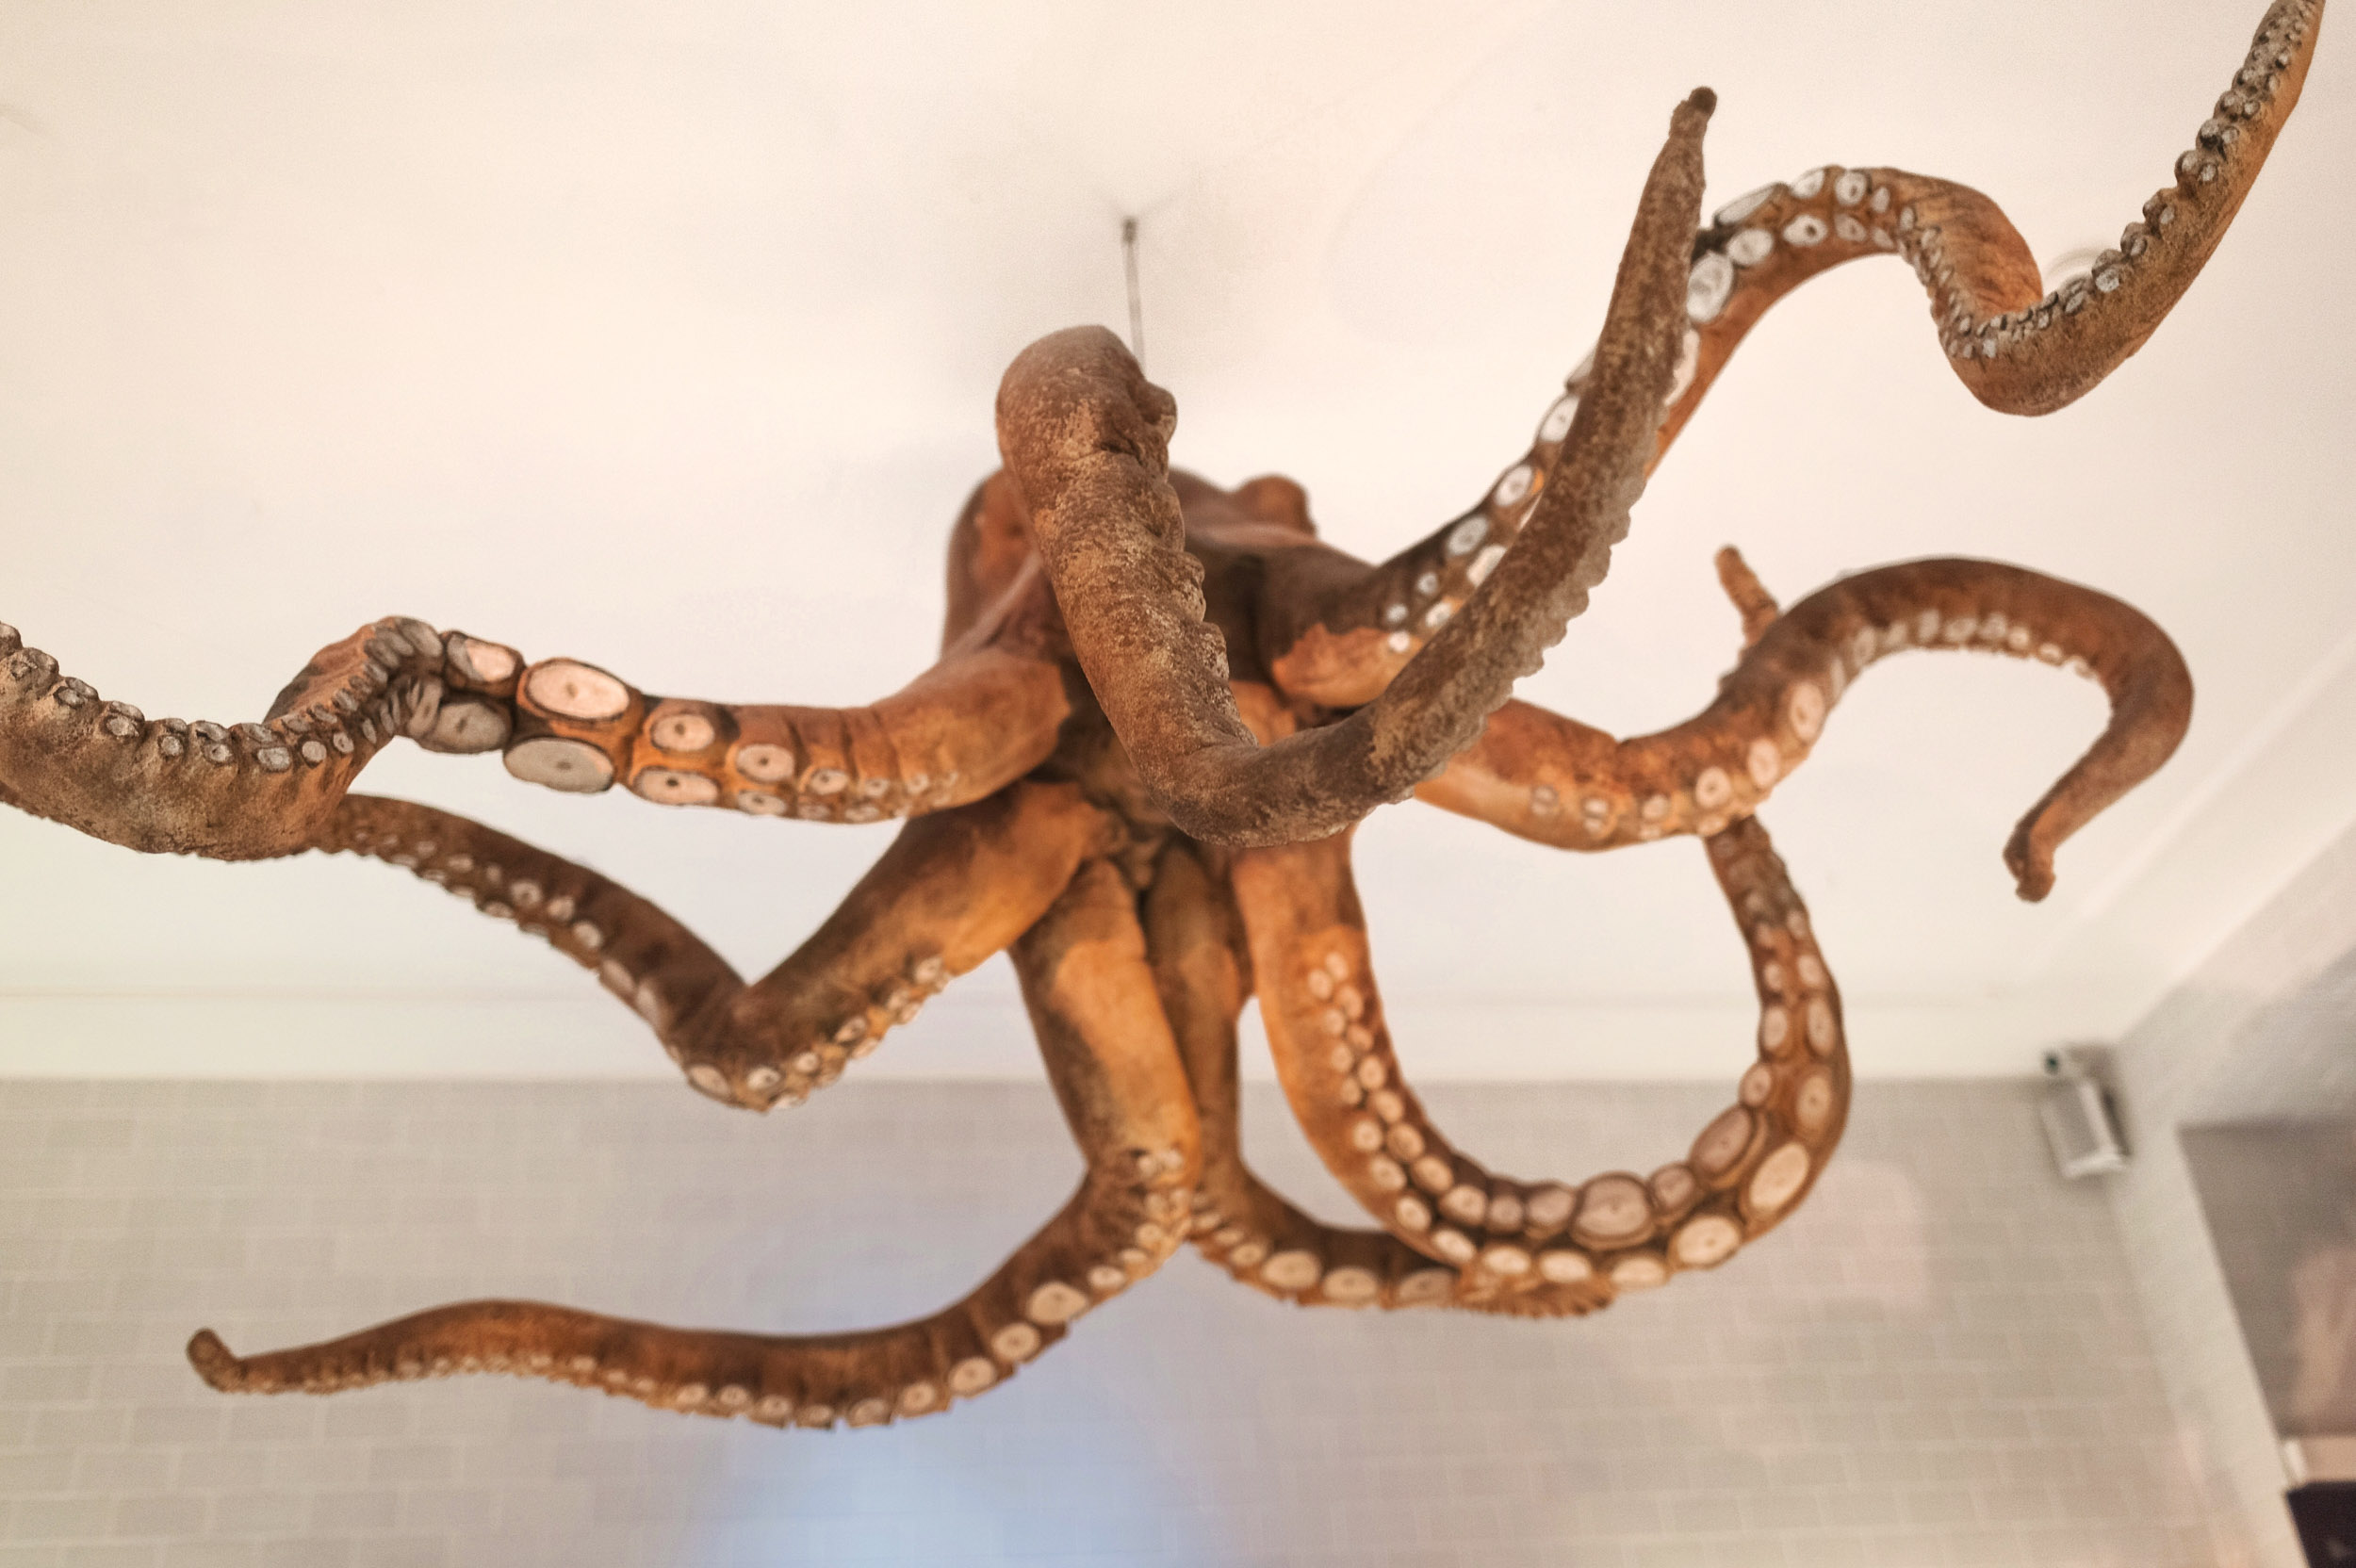 Octopus on display at A Cevicheria in Lisbon